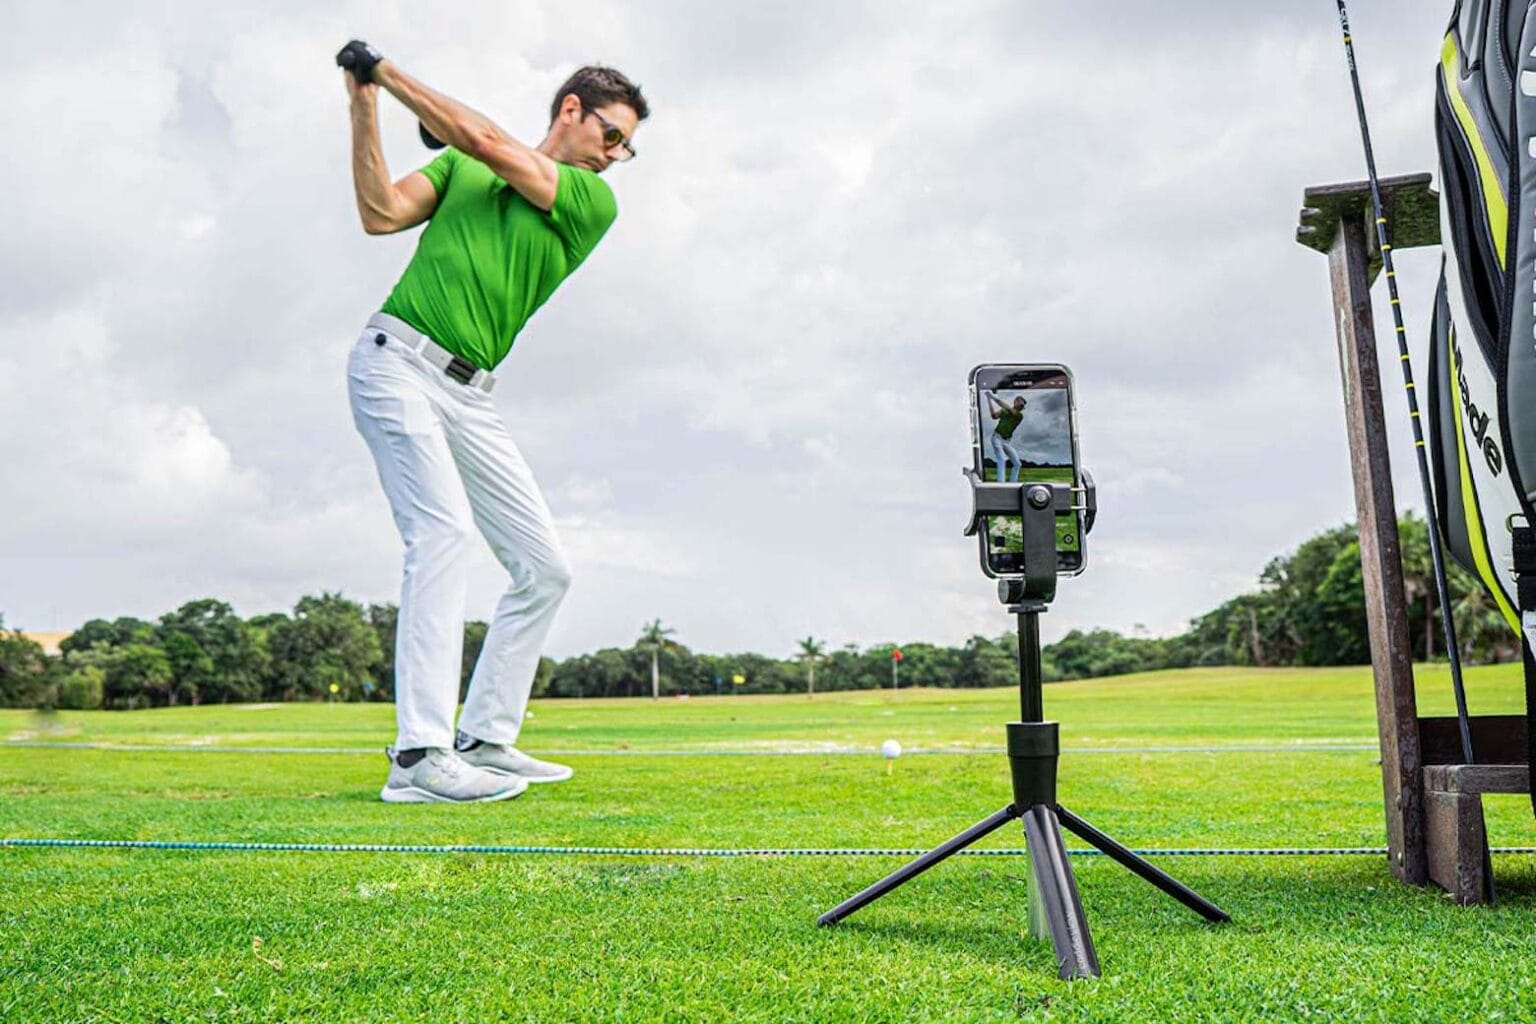 Get a PGA pro trainer in your pocket with this discounted gadget.